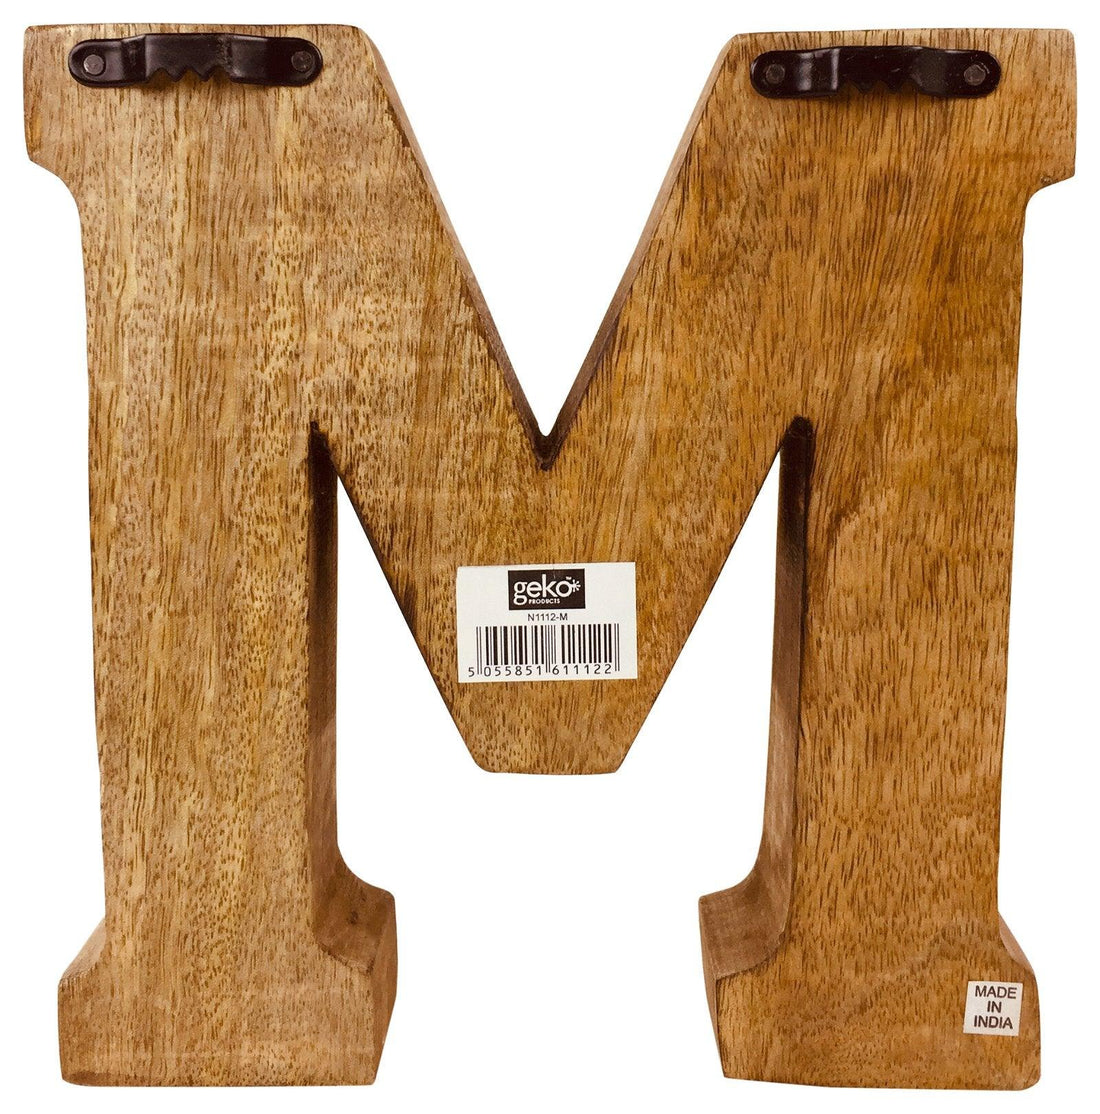 Hand Carved Wooden Embossed Letter M - £18.99 - Single Letters 